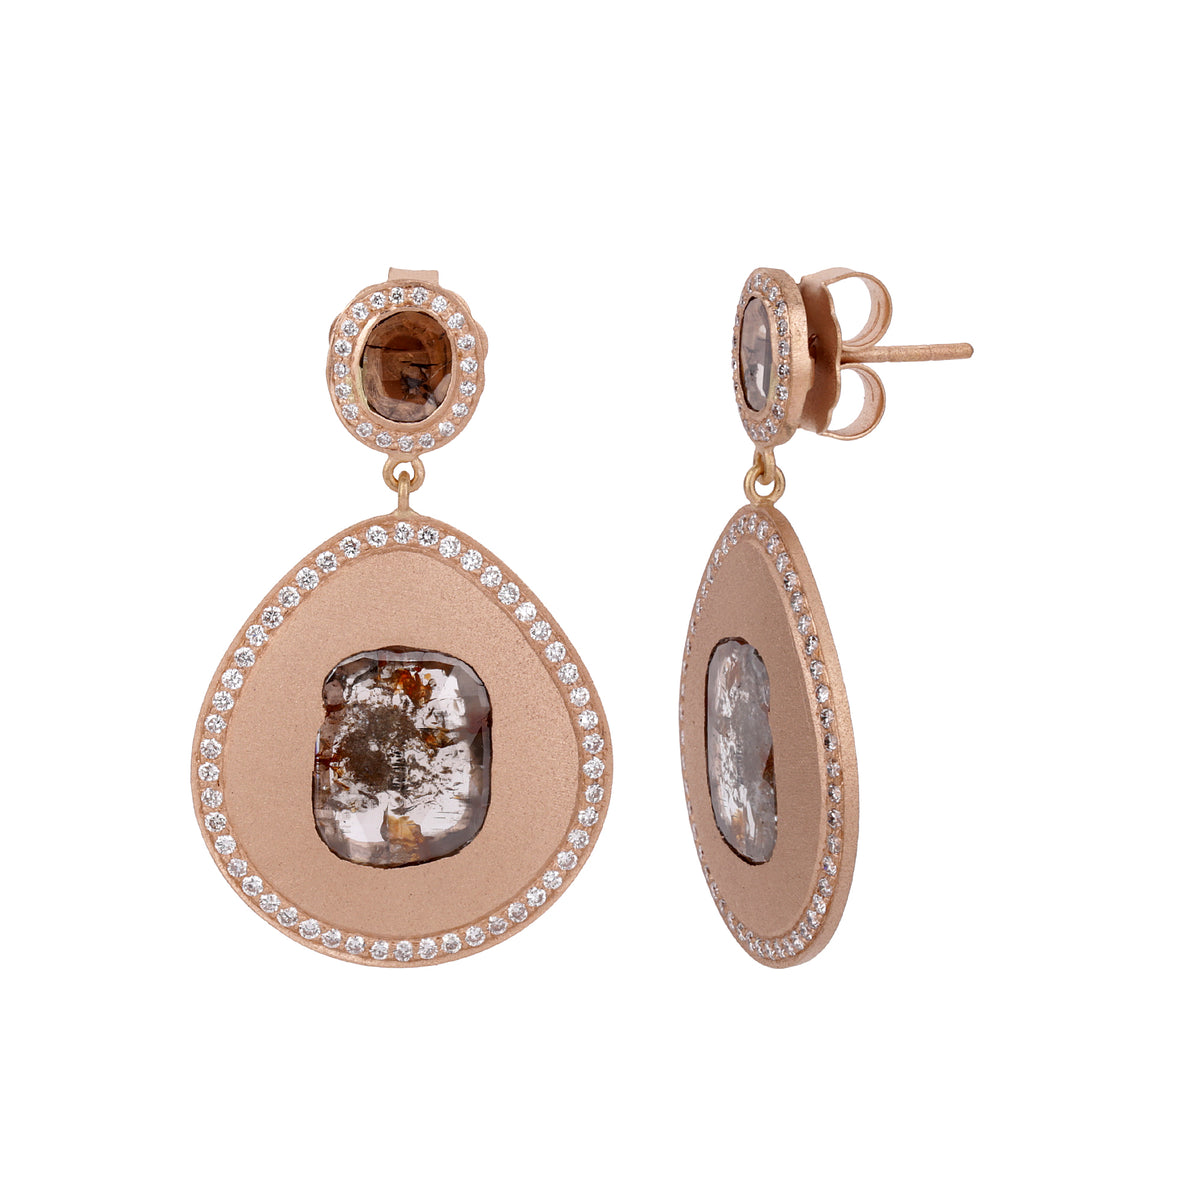 Earrings made of 750 rose gold with a diamond disc